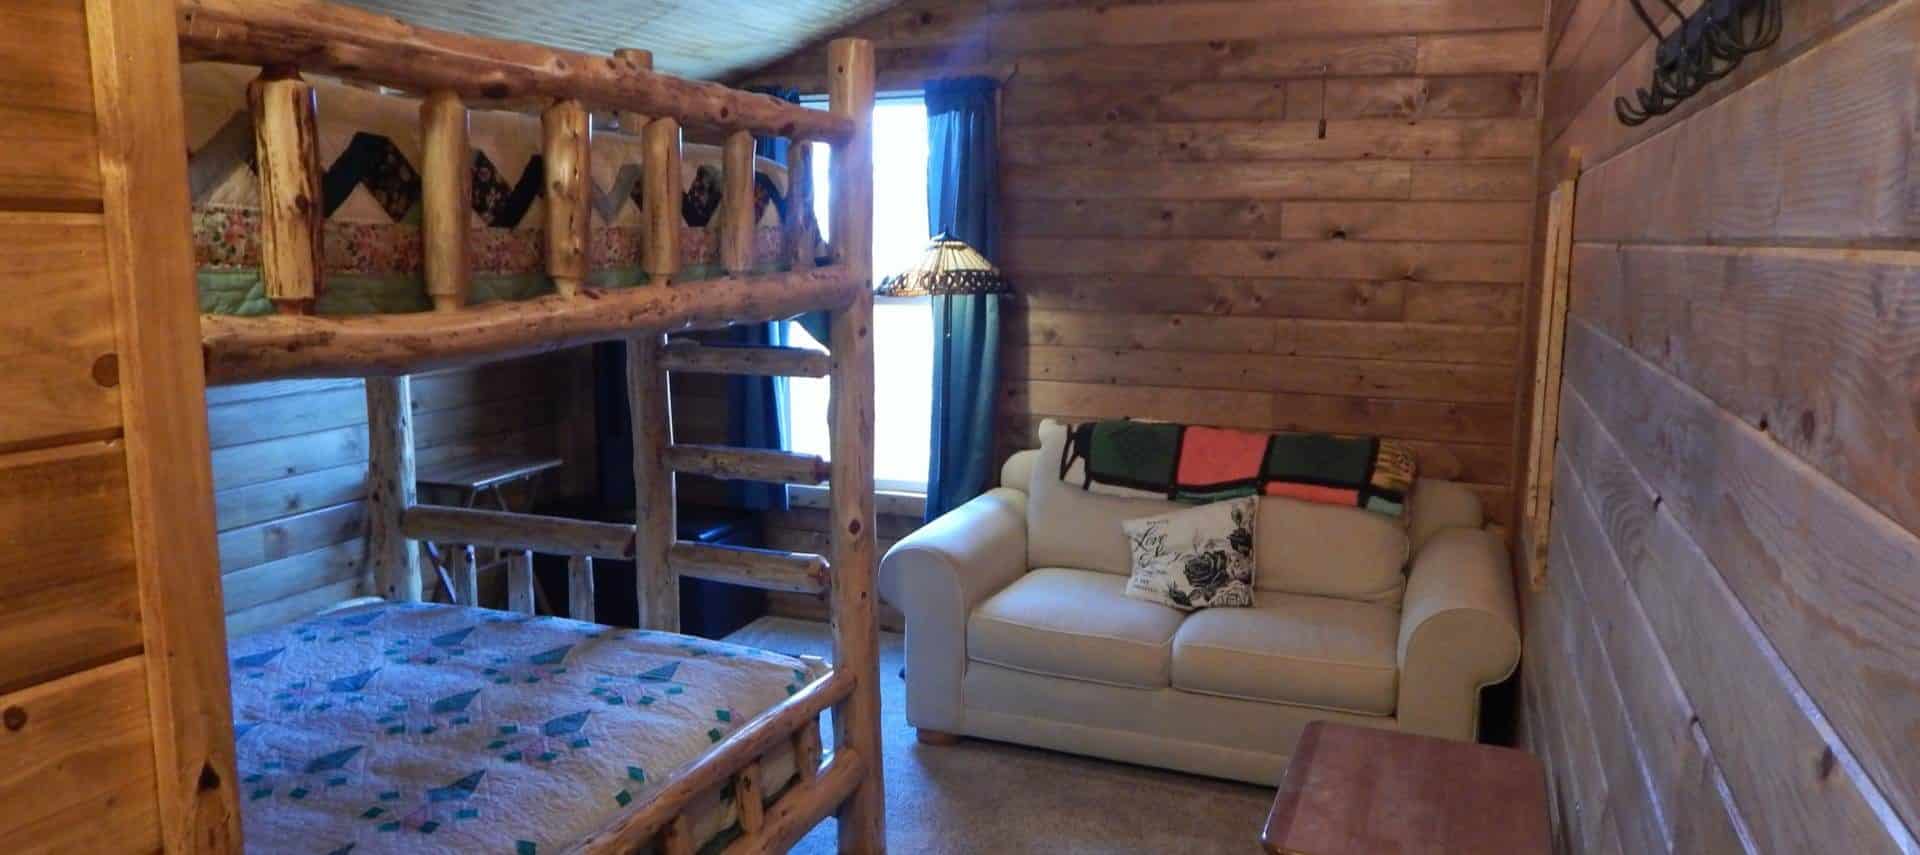 Bedroom with carpet, wood paneling on the walls, wooden bunk bed, and love seat